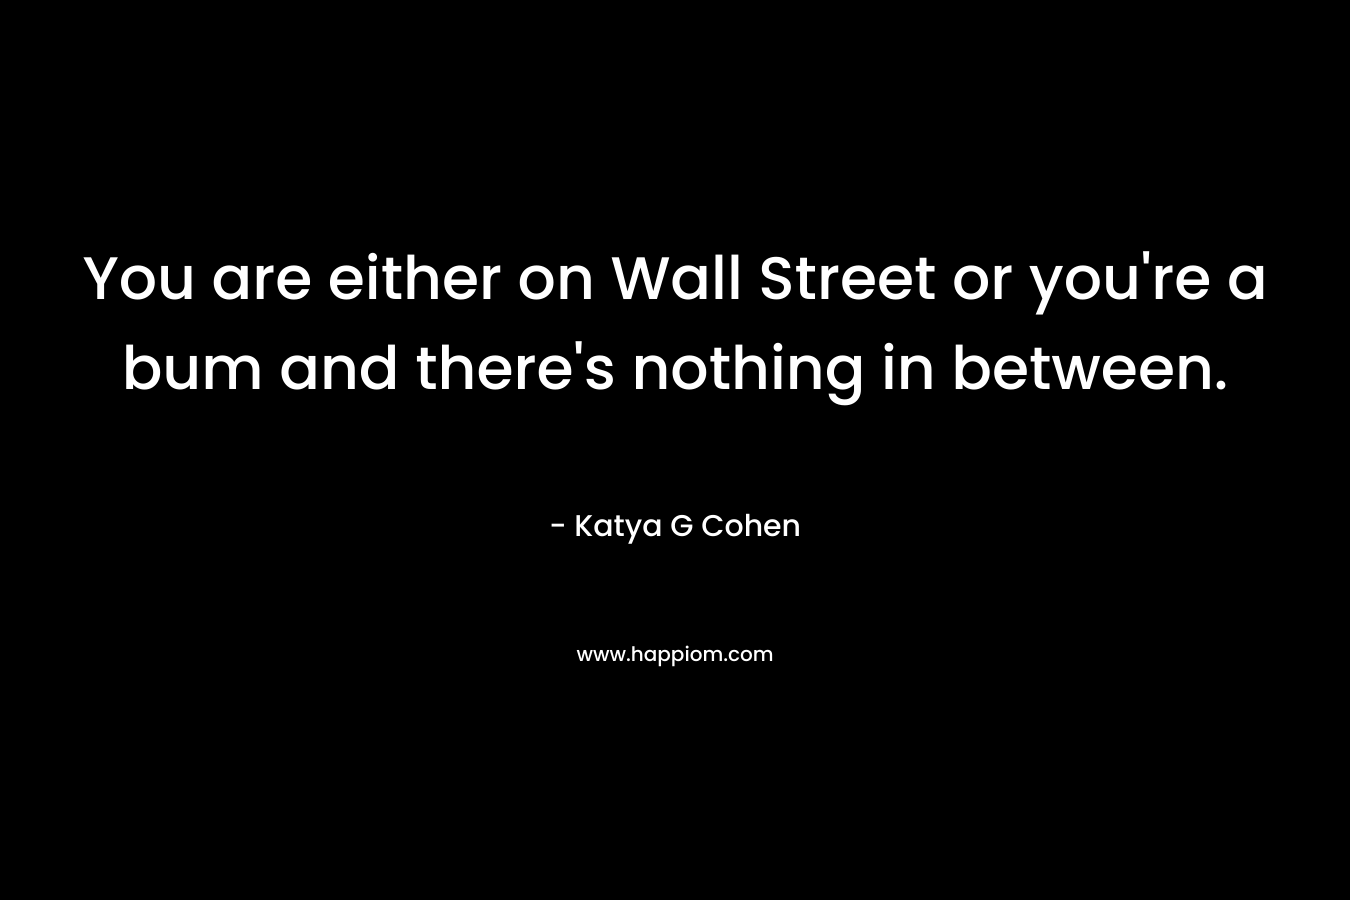 You are either on Wall Street or you’re a bum and there’s nothing in between. – Katya G Cohen